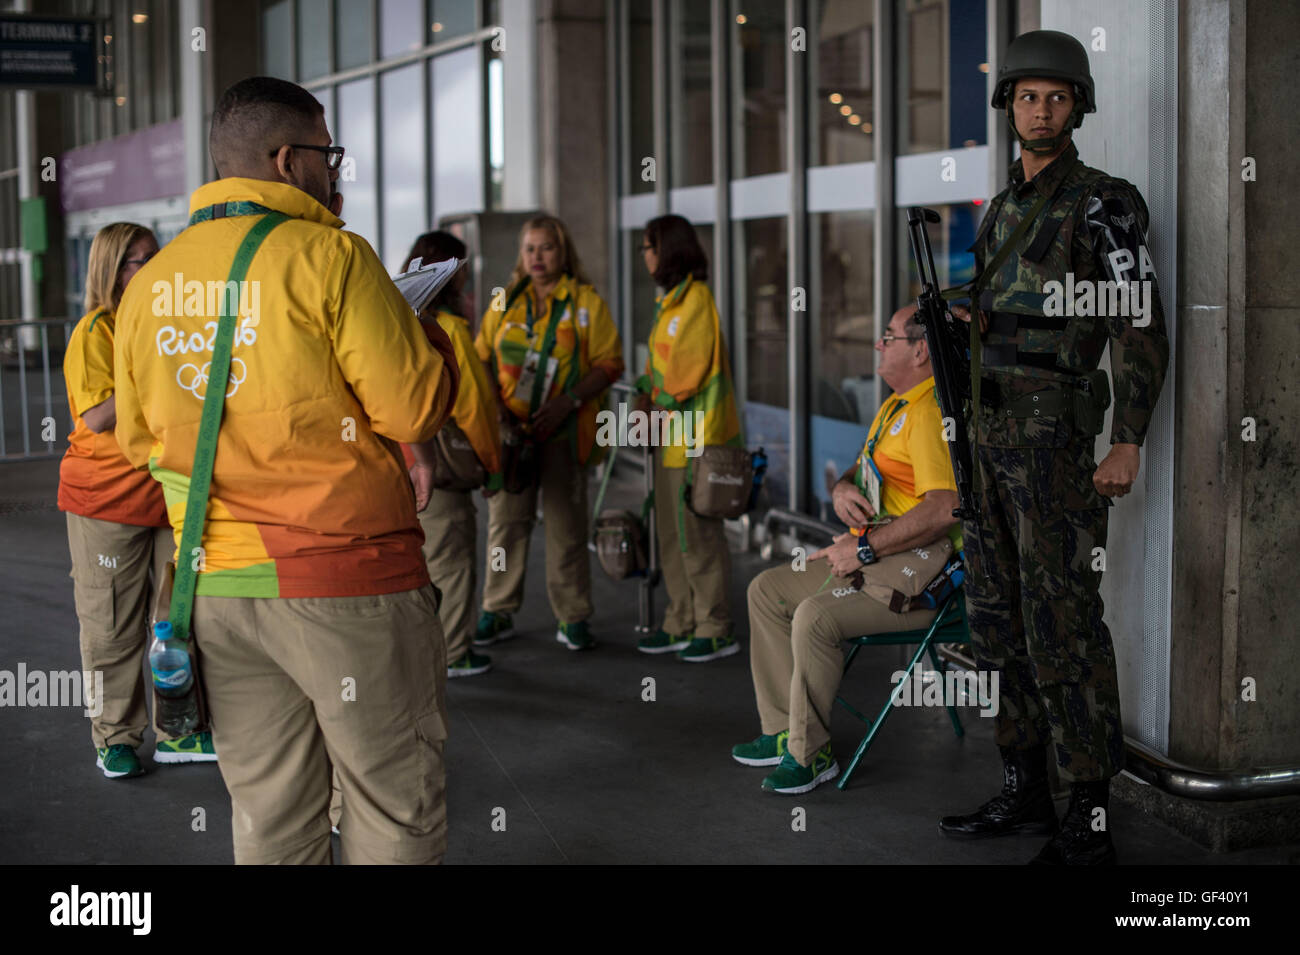 Rio De Janeiro, Brazil. 28th July, 2016. A soldier (R) stands guard at Rio International Airport in Rio de Janeiro, Brazil, July 28, 2016. South America's largest country will deploy 88,000 soldiers and police during the Olympics, more than double the number at the London 2012 Games. © Lui Siuwai/Xinhua/Alamy Live News Stock Photo